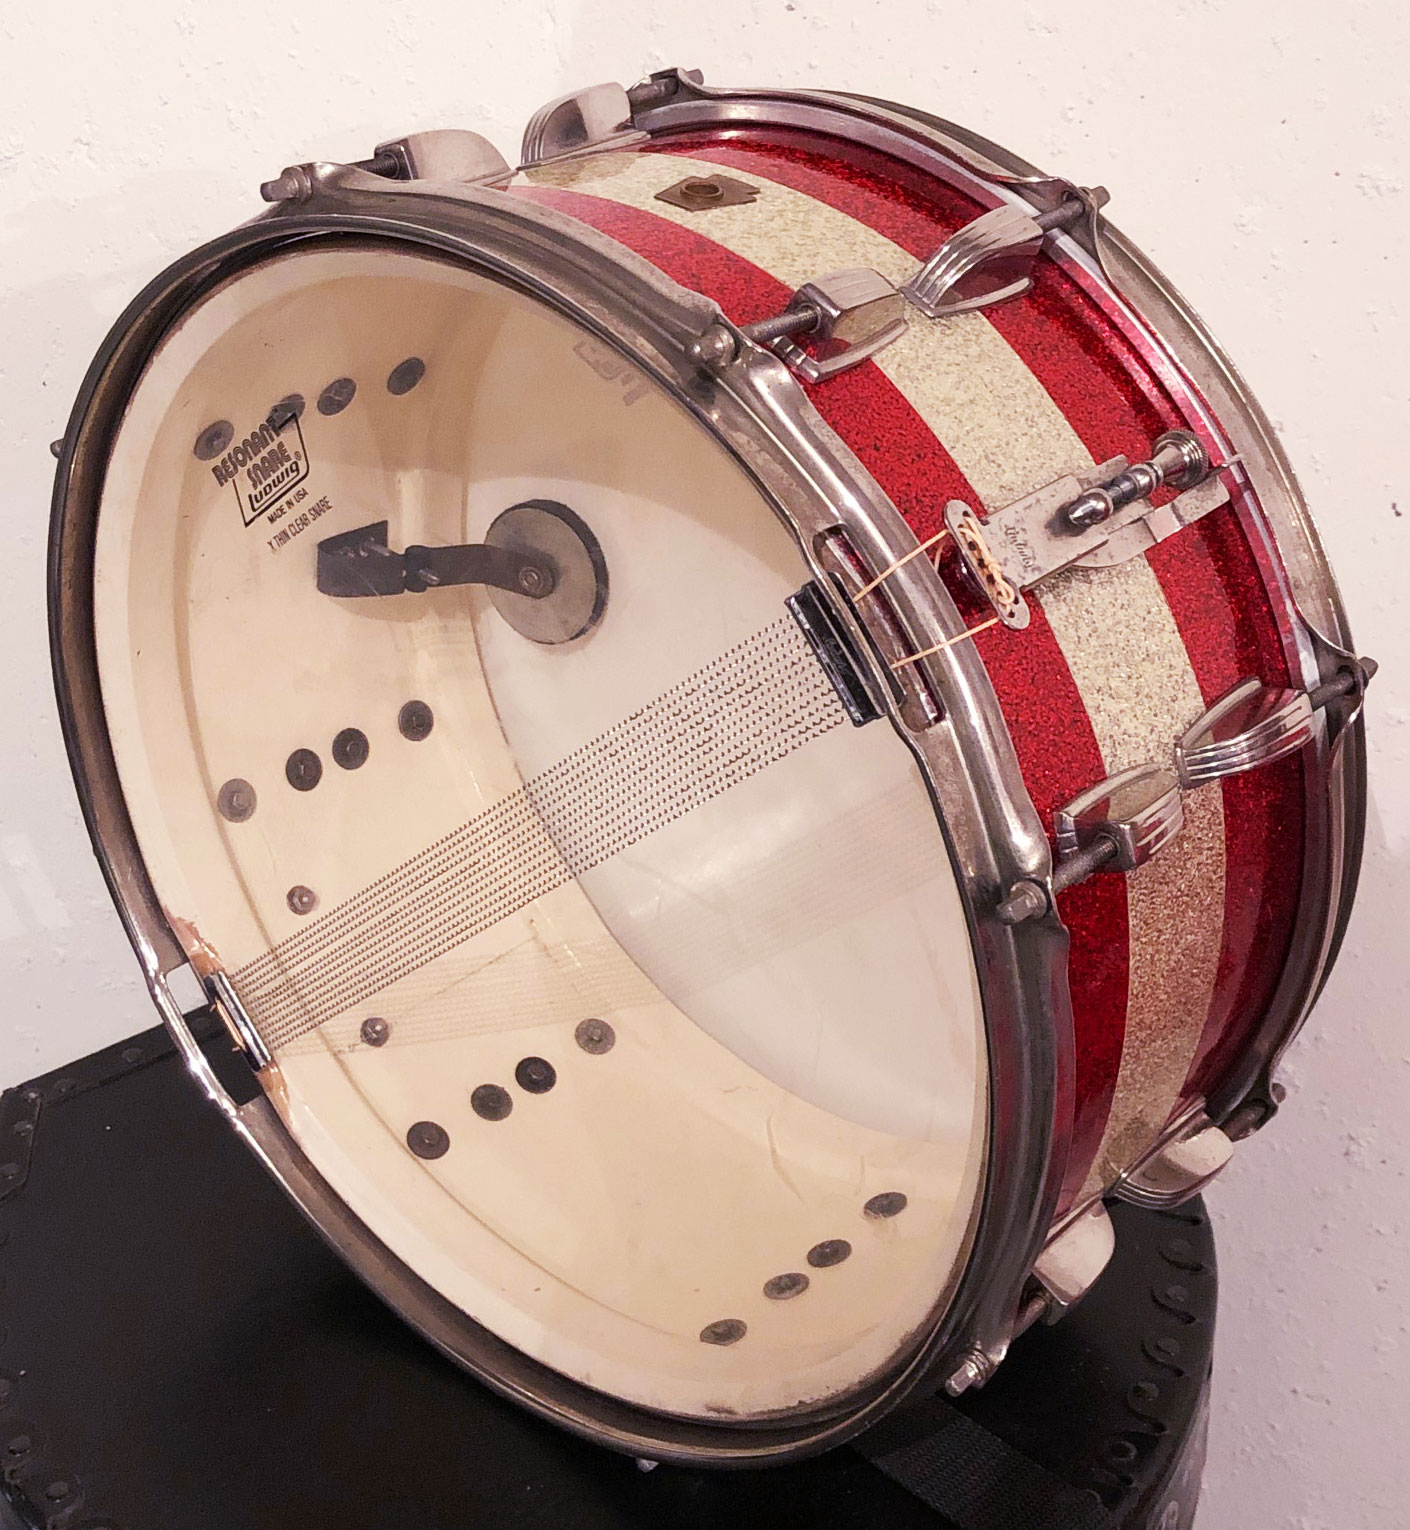 Vintage 1961 Ludwig School Festival 6.5x15 Snare Drum in Red/Silver/Red Sparkle